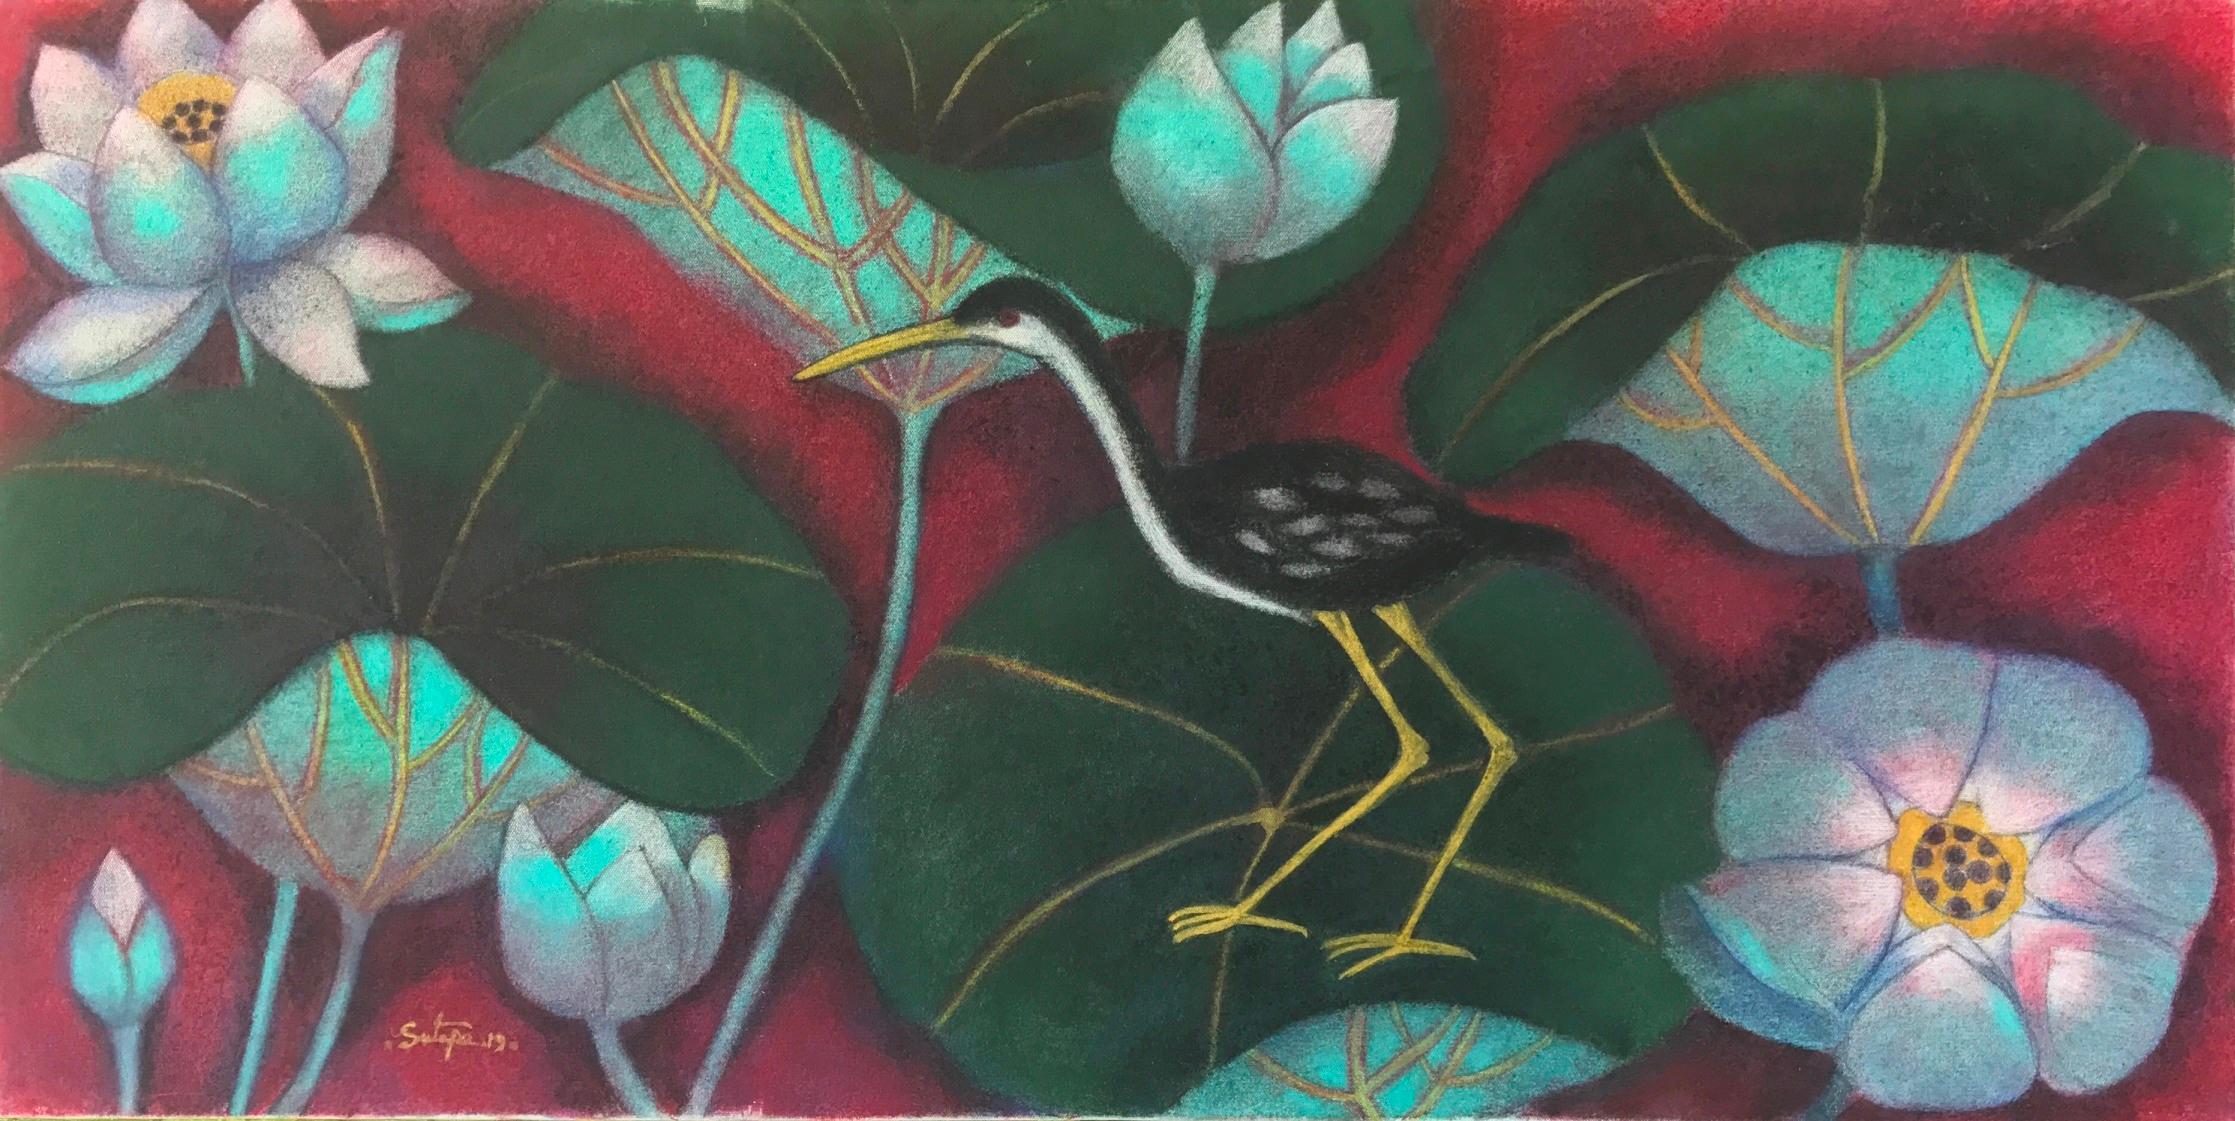 Sutapa Khan Figurative Painting - Lotus Pond-1, Tempera on Canvas, Red, Green by Contemporary Artist "In Stock"